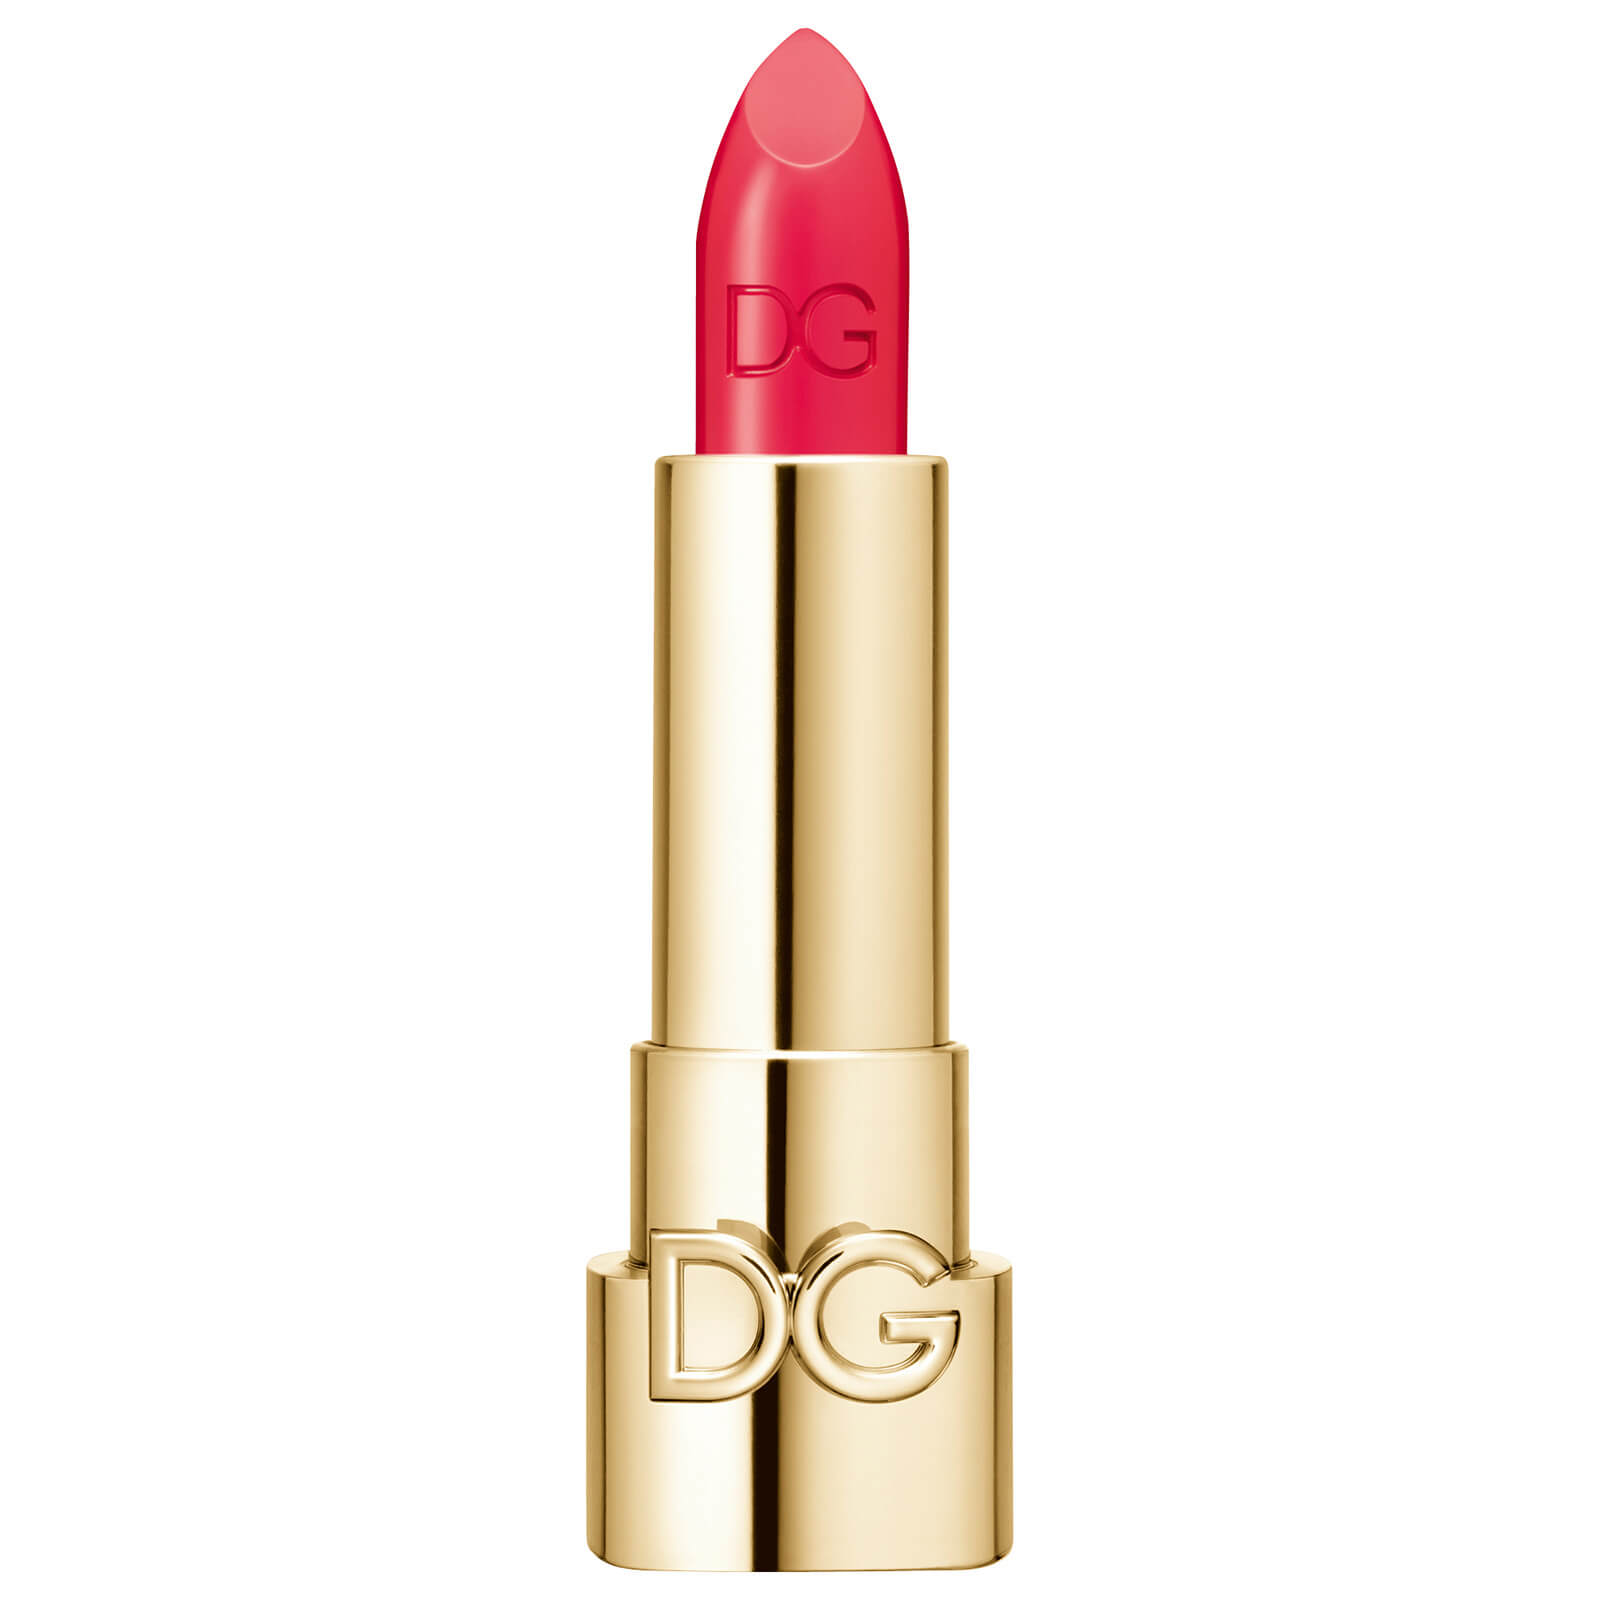 Image of Dolce&Gabbana The Only One Lipstick 1.7g (No Cap) (Various Shades) - 410 Pop Watermelon